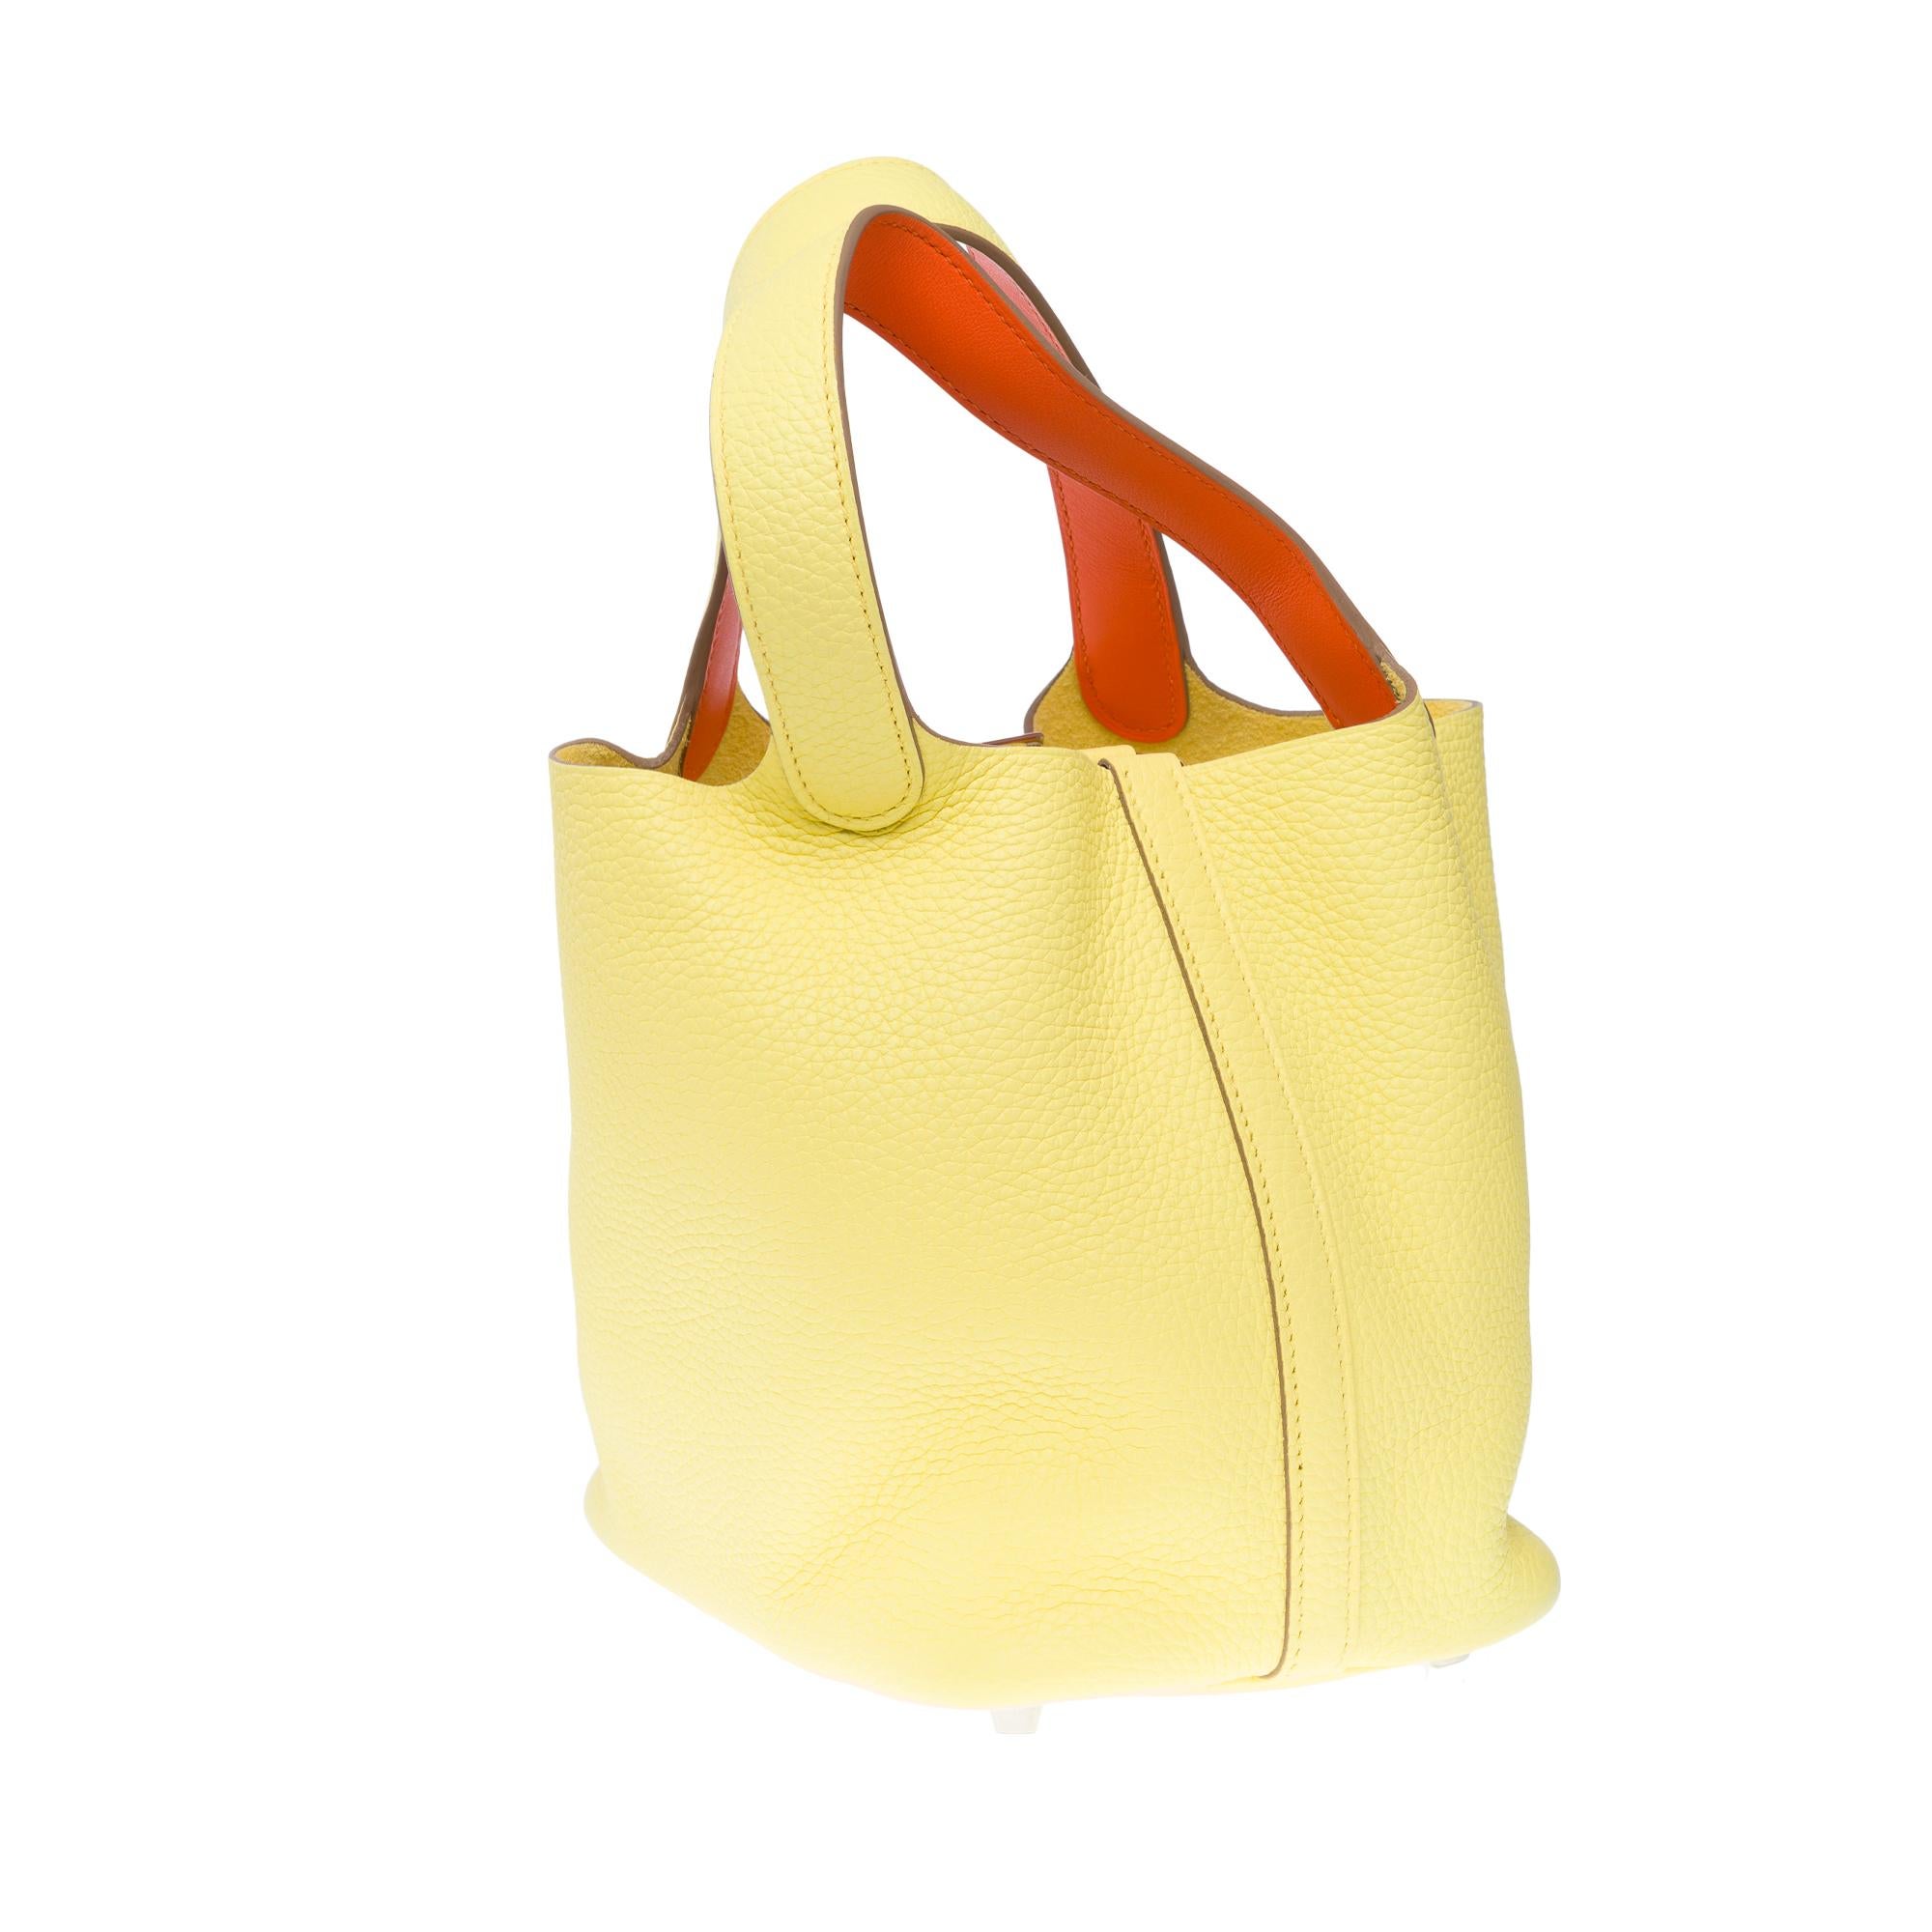 New Hermès Picotin Lock 18 Eclat in Limoncello Taurillon Clemence leather , SHW For Sale 2